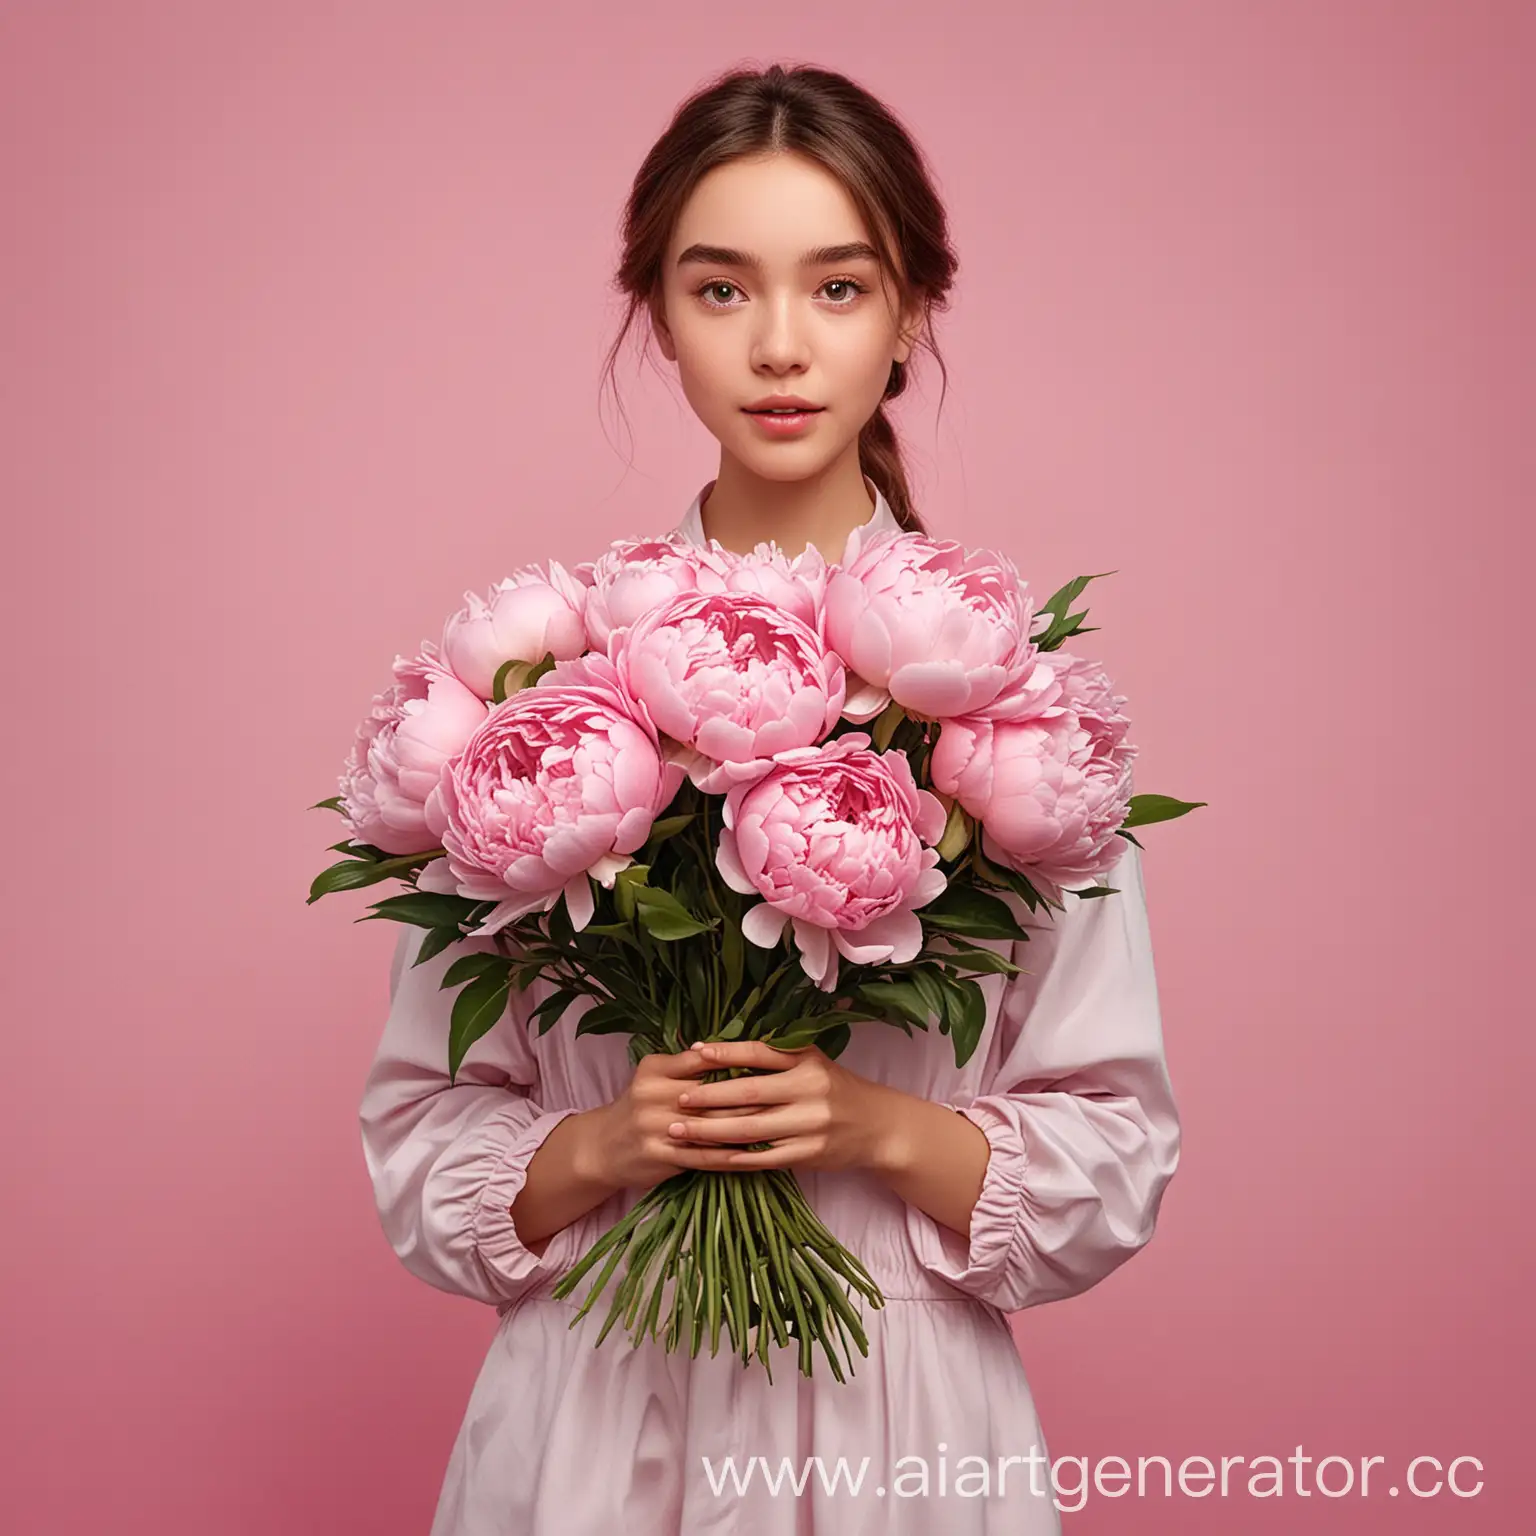 Elegant-Girl-with-Peony-Bouquet-on-Pink-Background